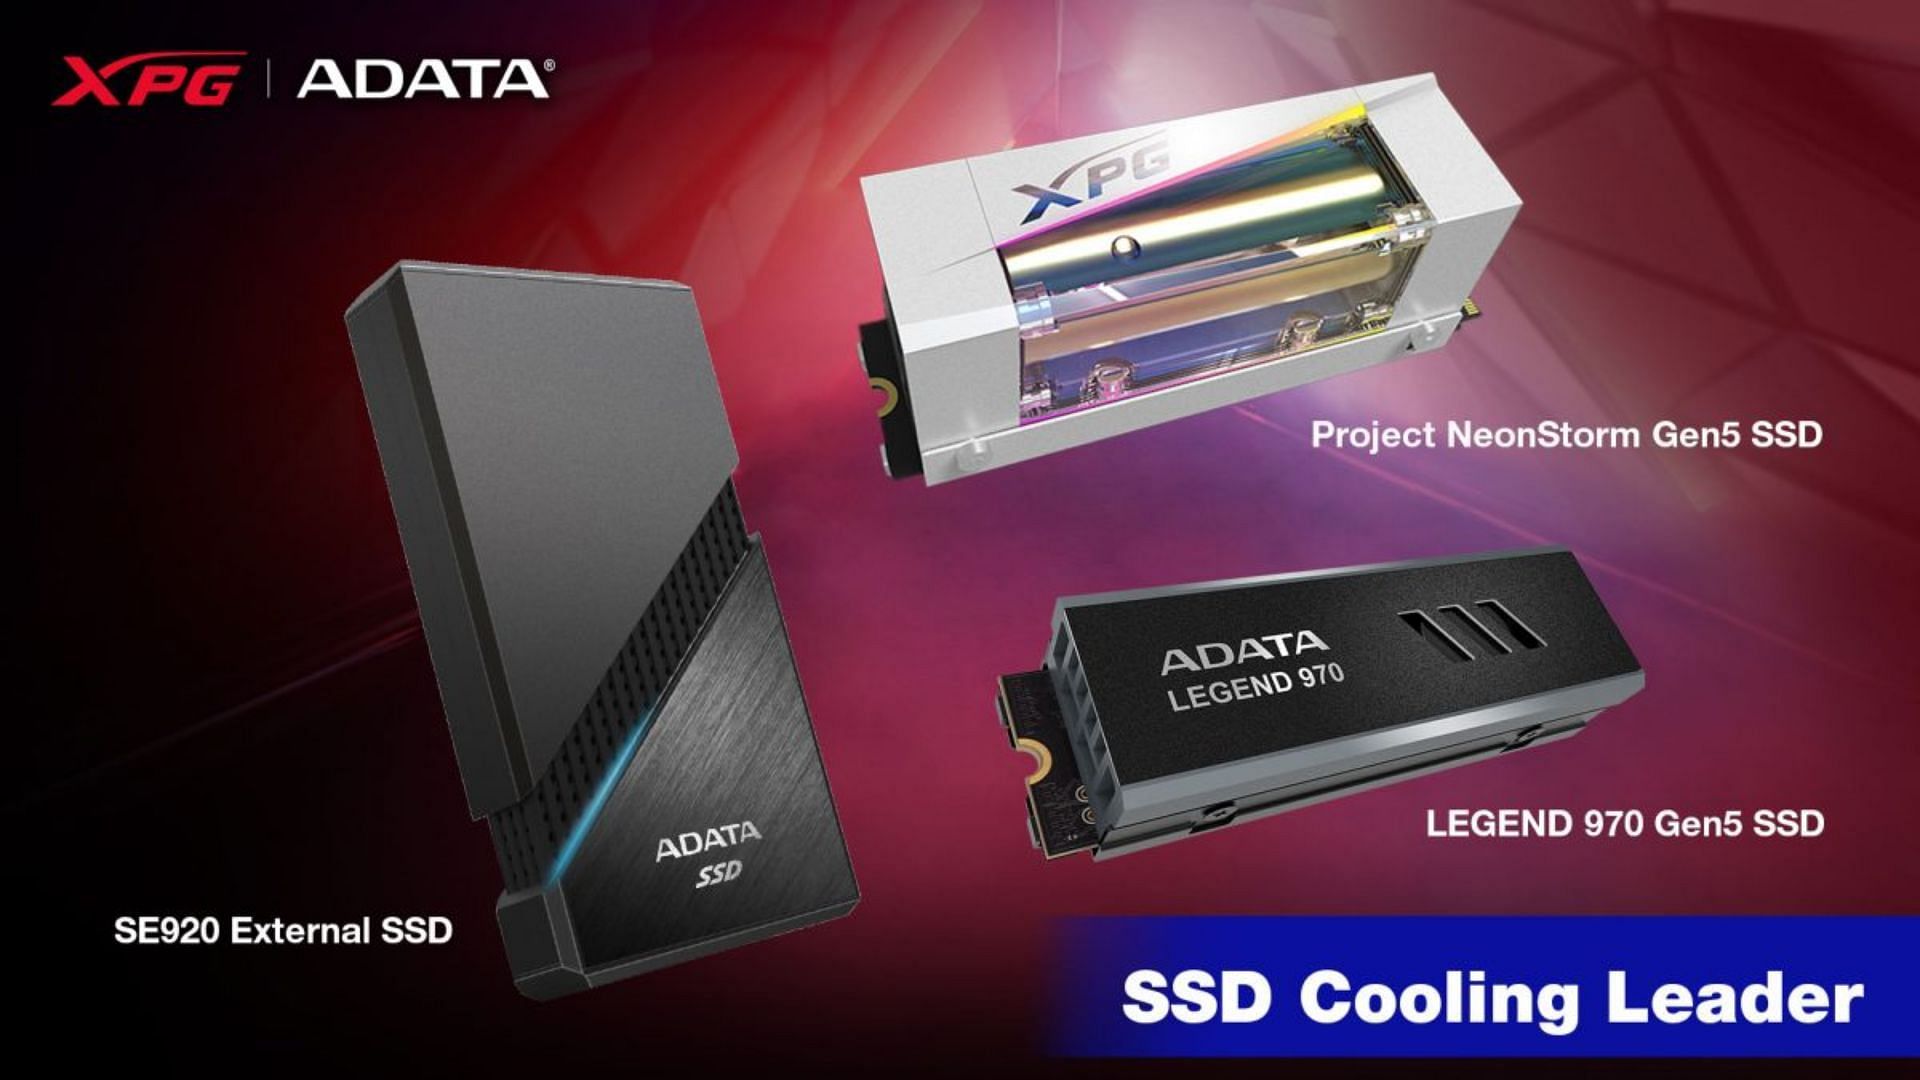 New Adata and XPG launches offer solid RAM and SSD performance (Image via Adata)